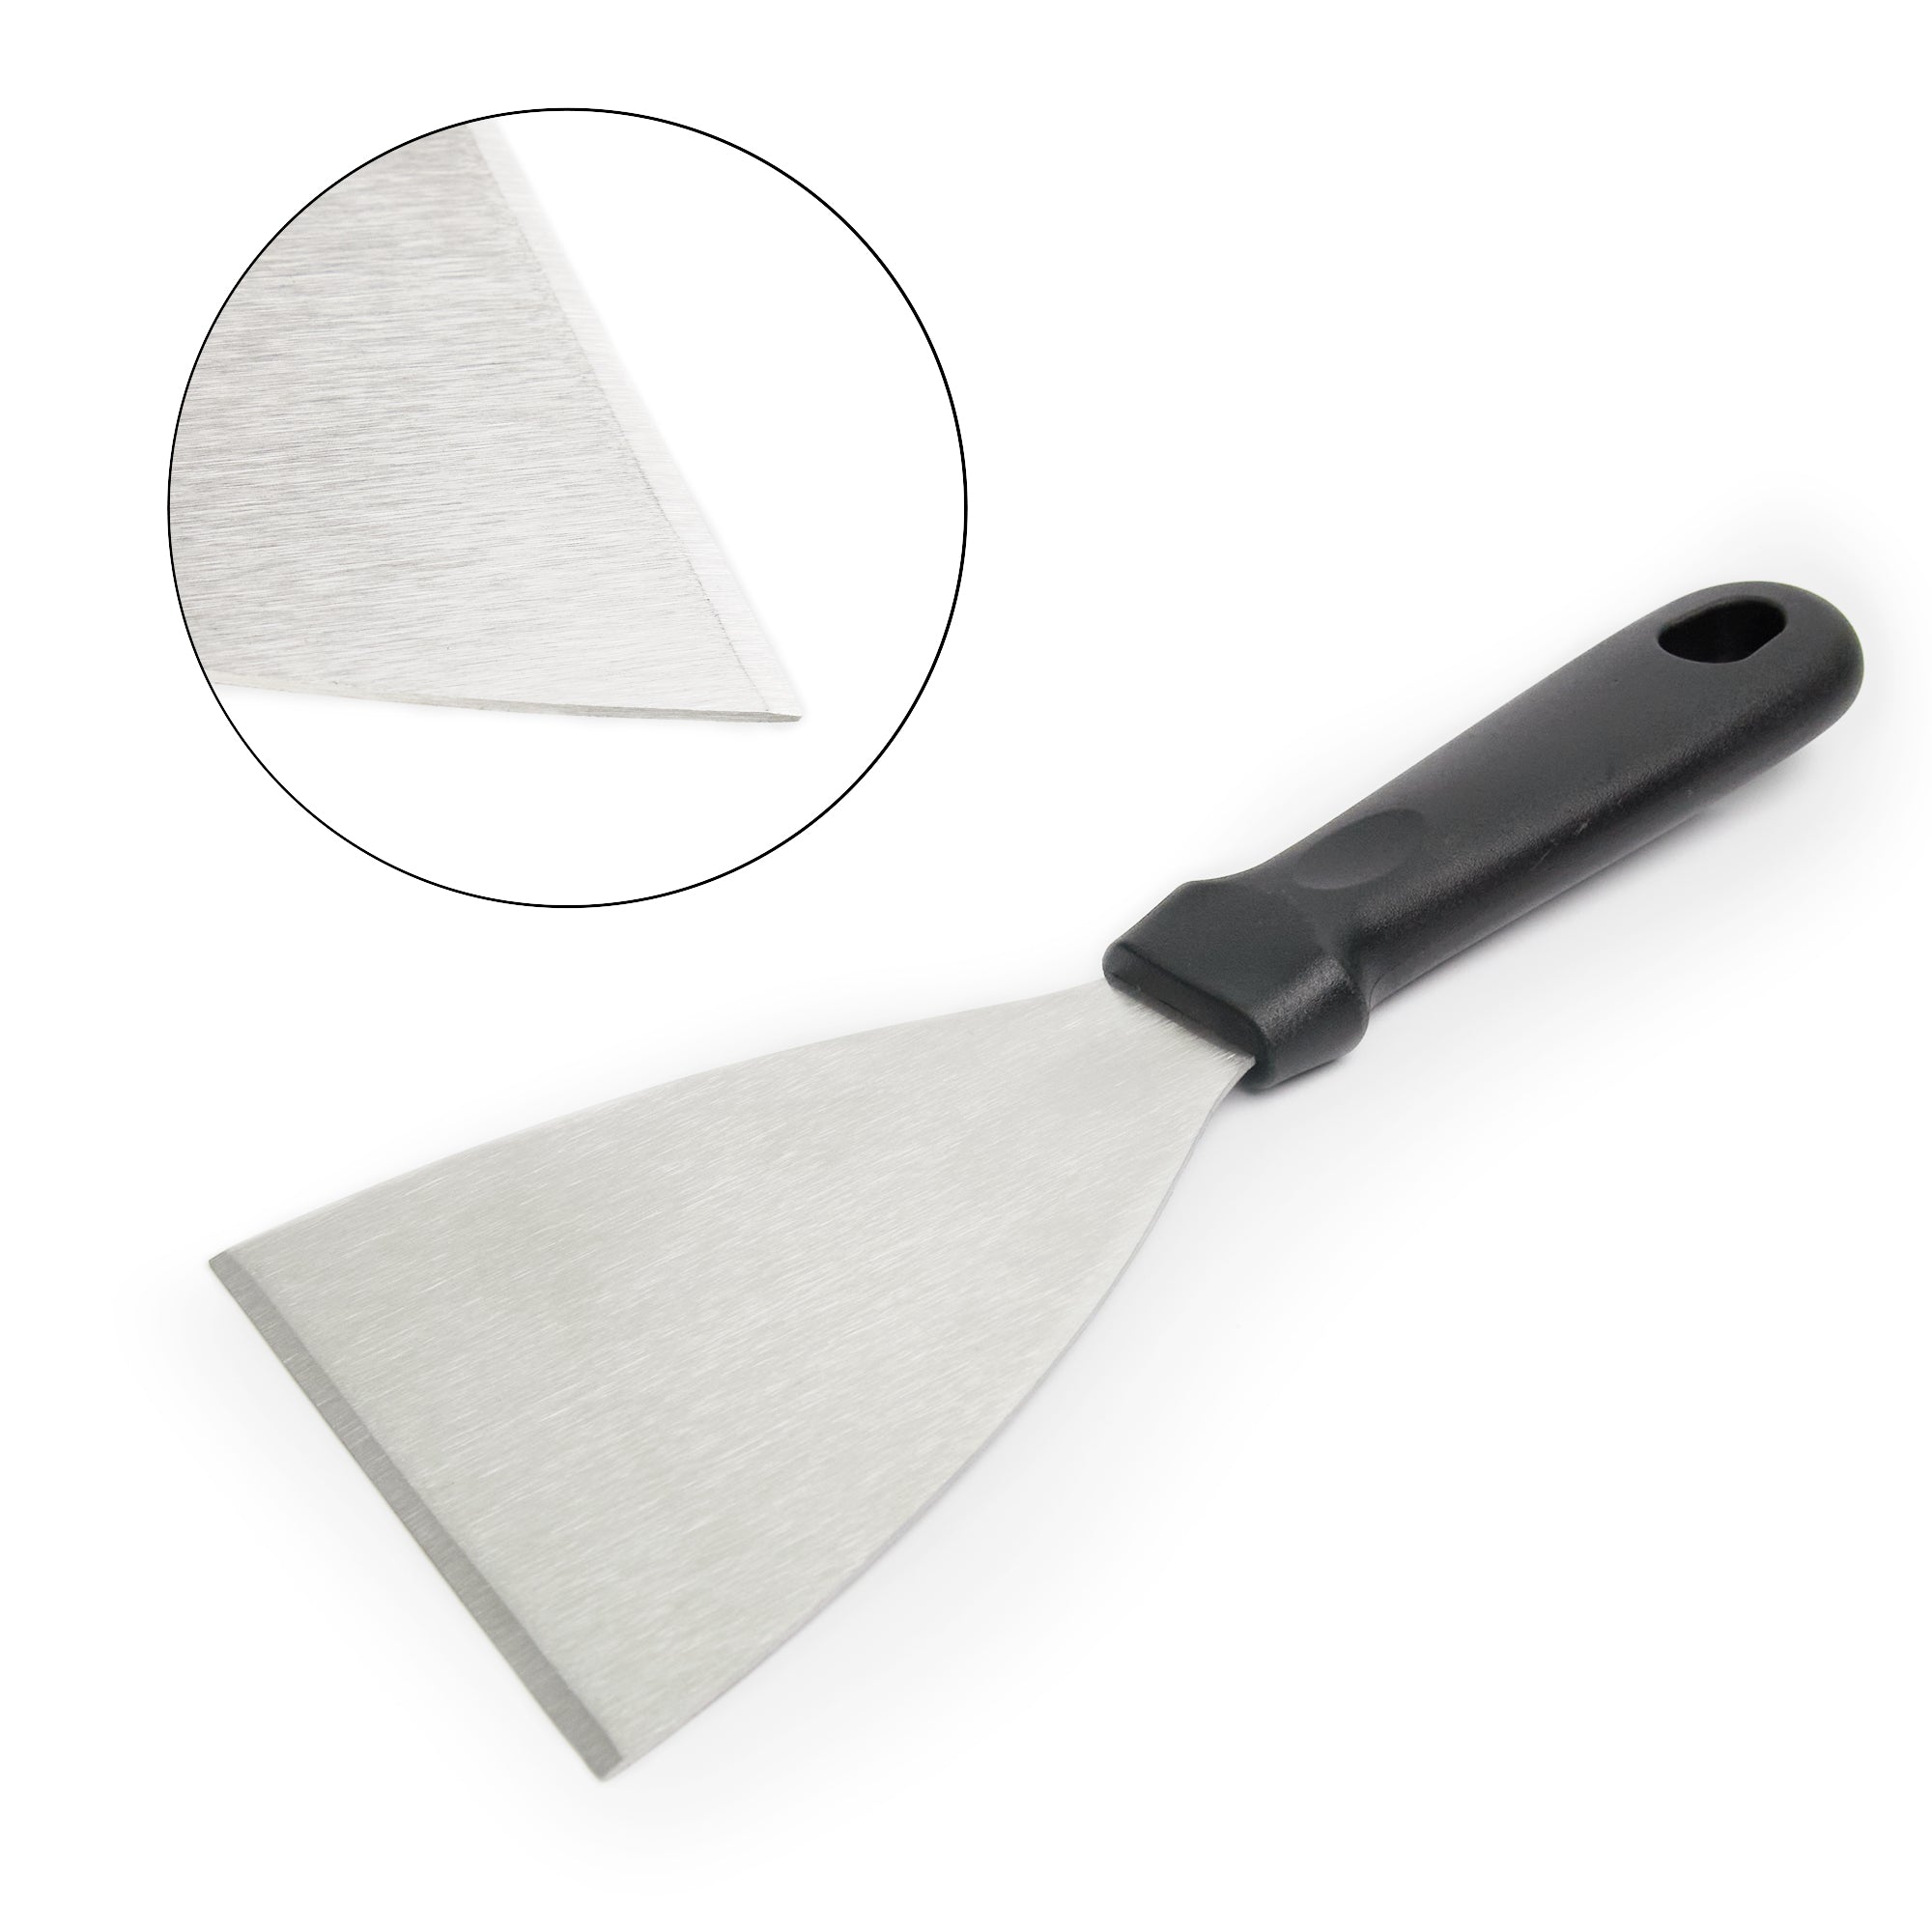 Stainless steel kitchen spatula with plastic handle